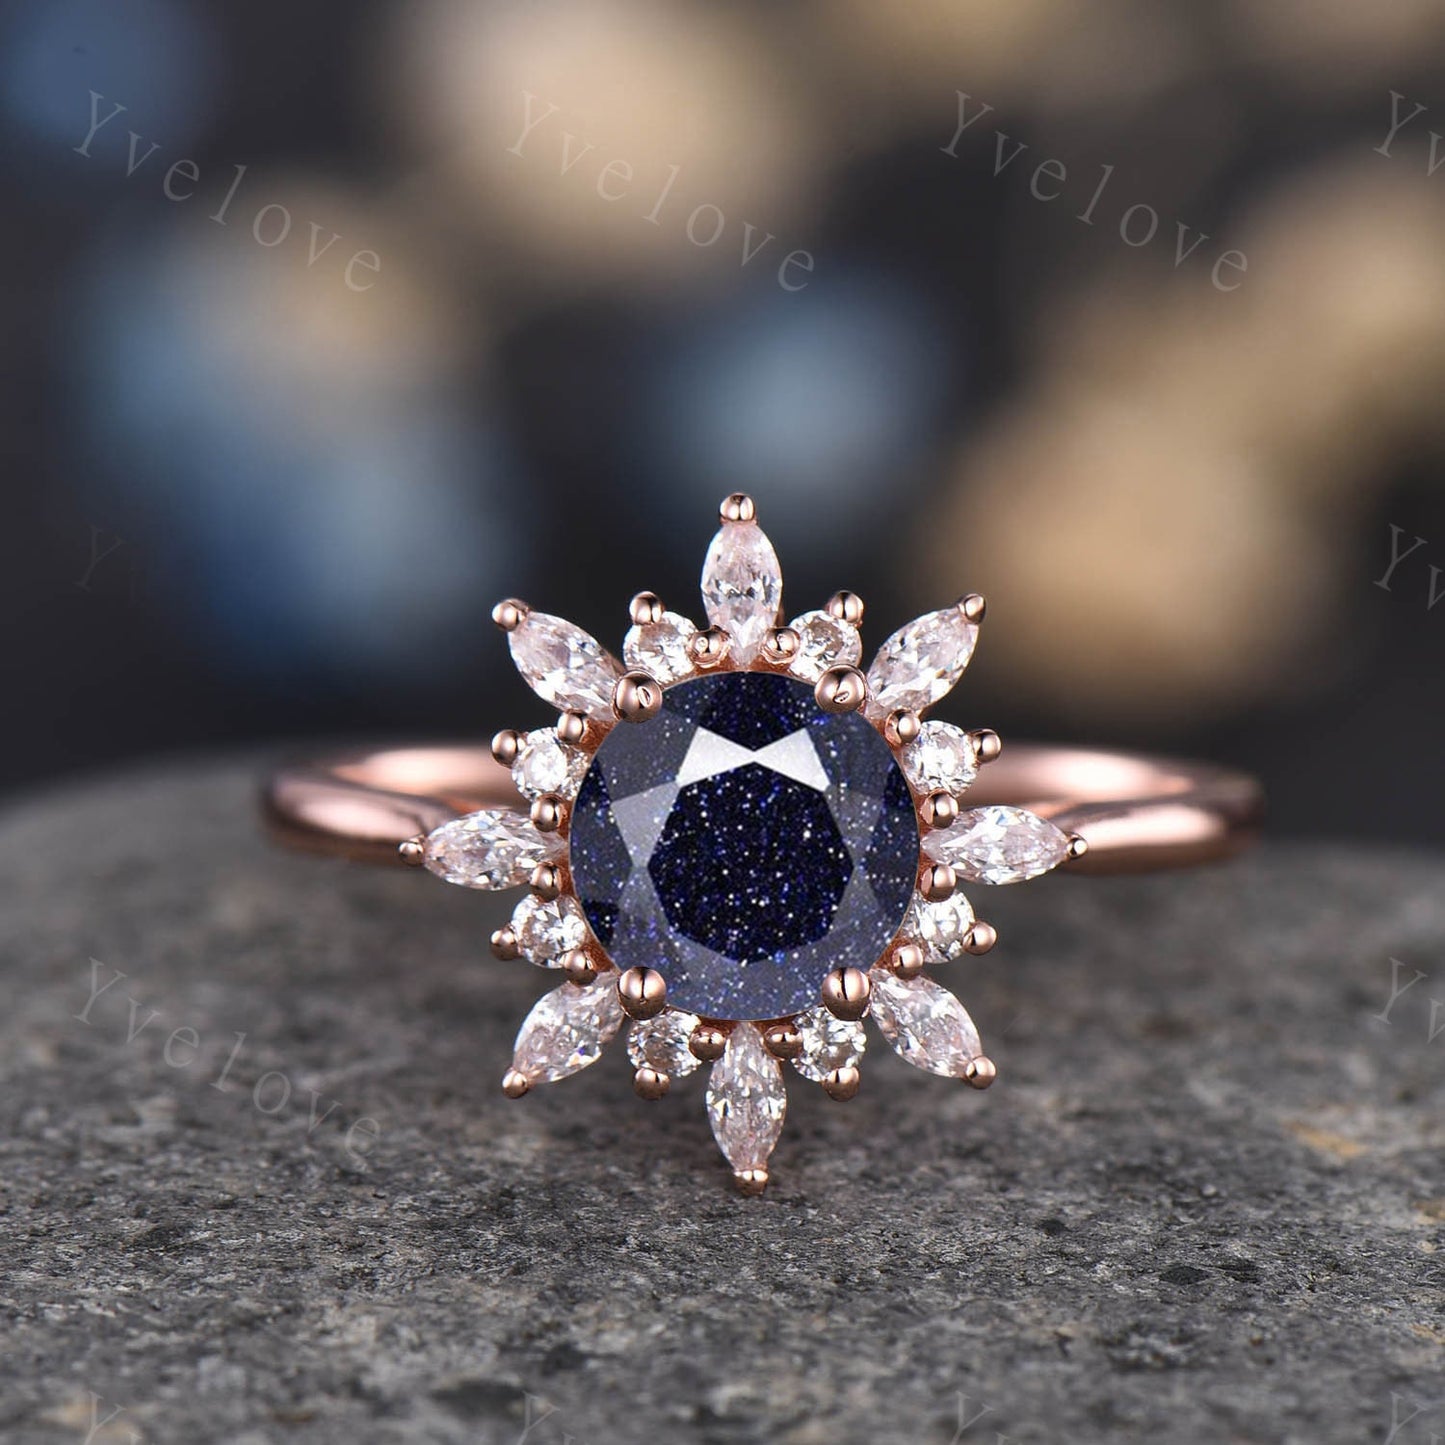 Unique Round cut Blue Sandstone Engagement Ring Women Antique Flower Diamond Halo Plain Gold Band Promise Bridal Anniversary Jewelry For Her